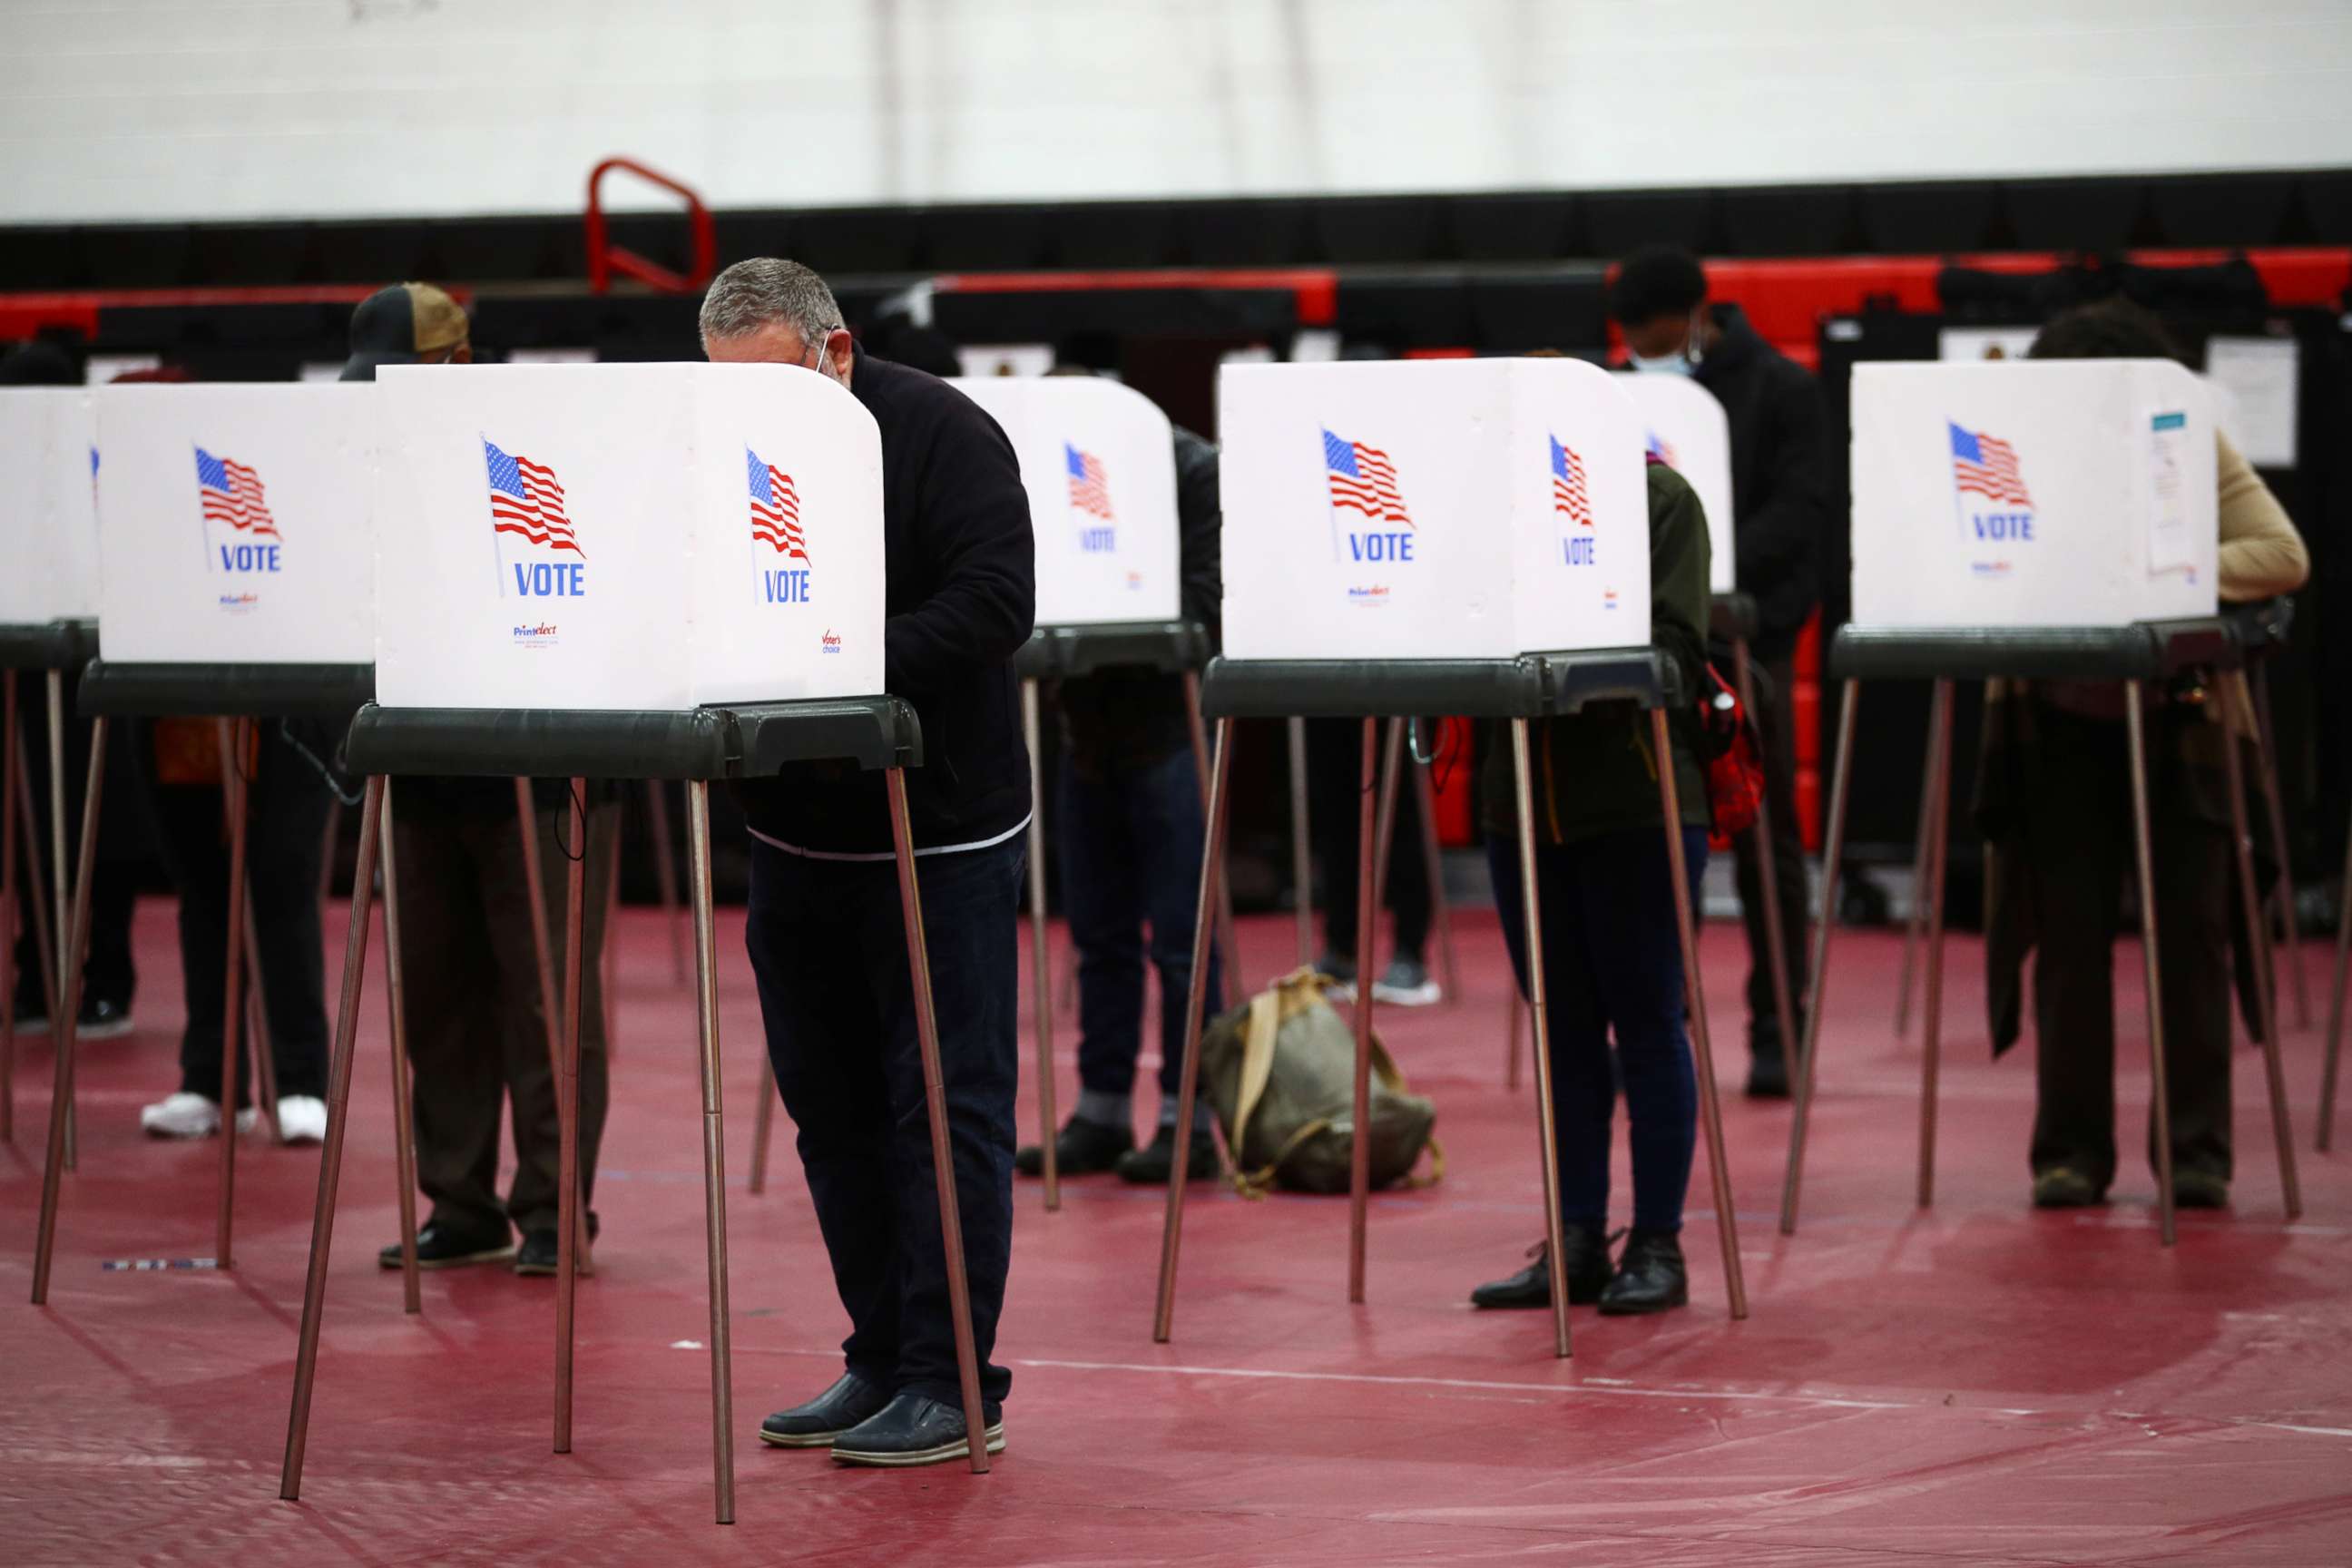 PHOTO: People fill out ballots in privacy booths at a polling station located in the Baltimore City Community College gymnasium in Baltimore, during early voting in Maryland, Oct. 26, 2020.